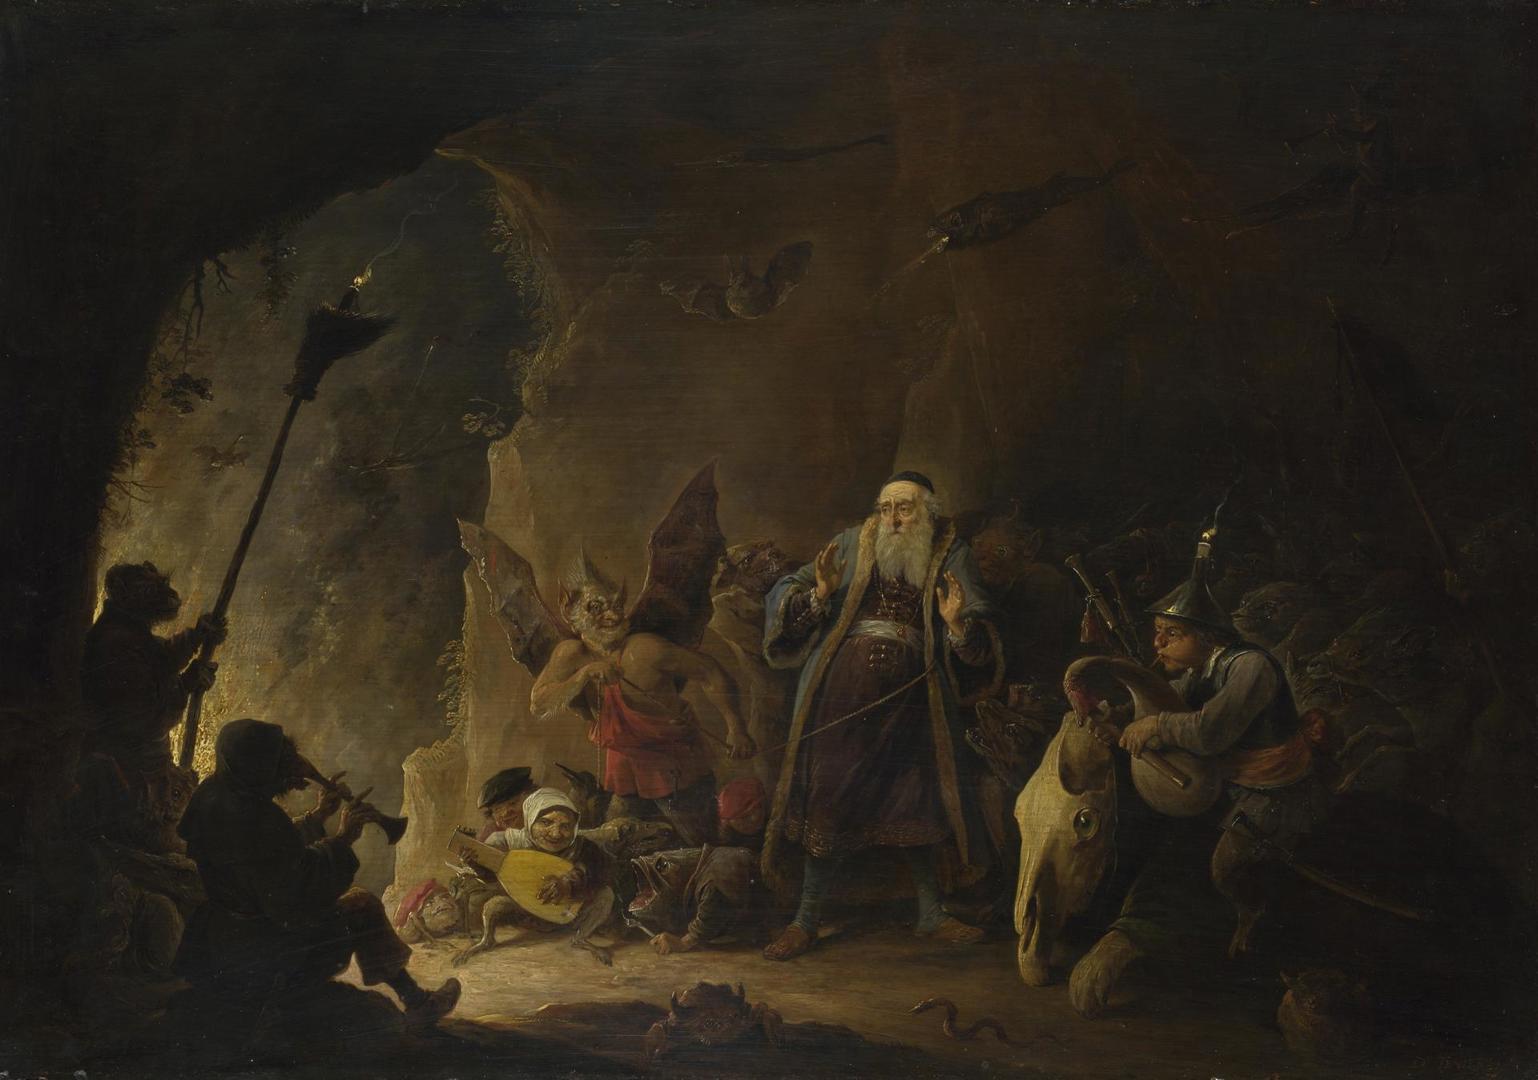 The Rich Man being led to Hell by David Teniers the Younger